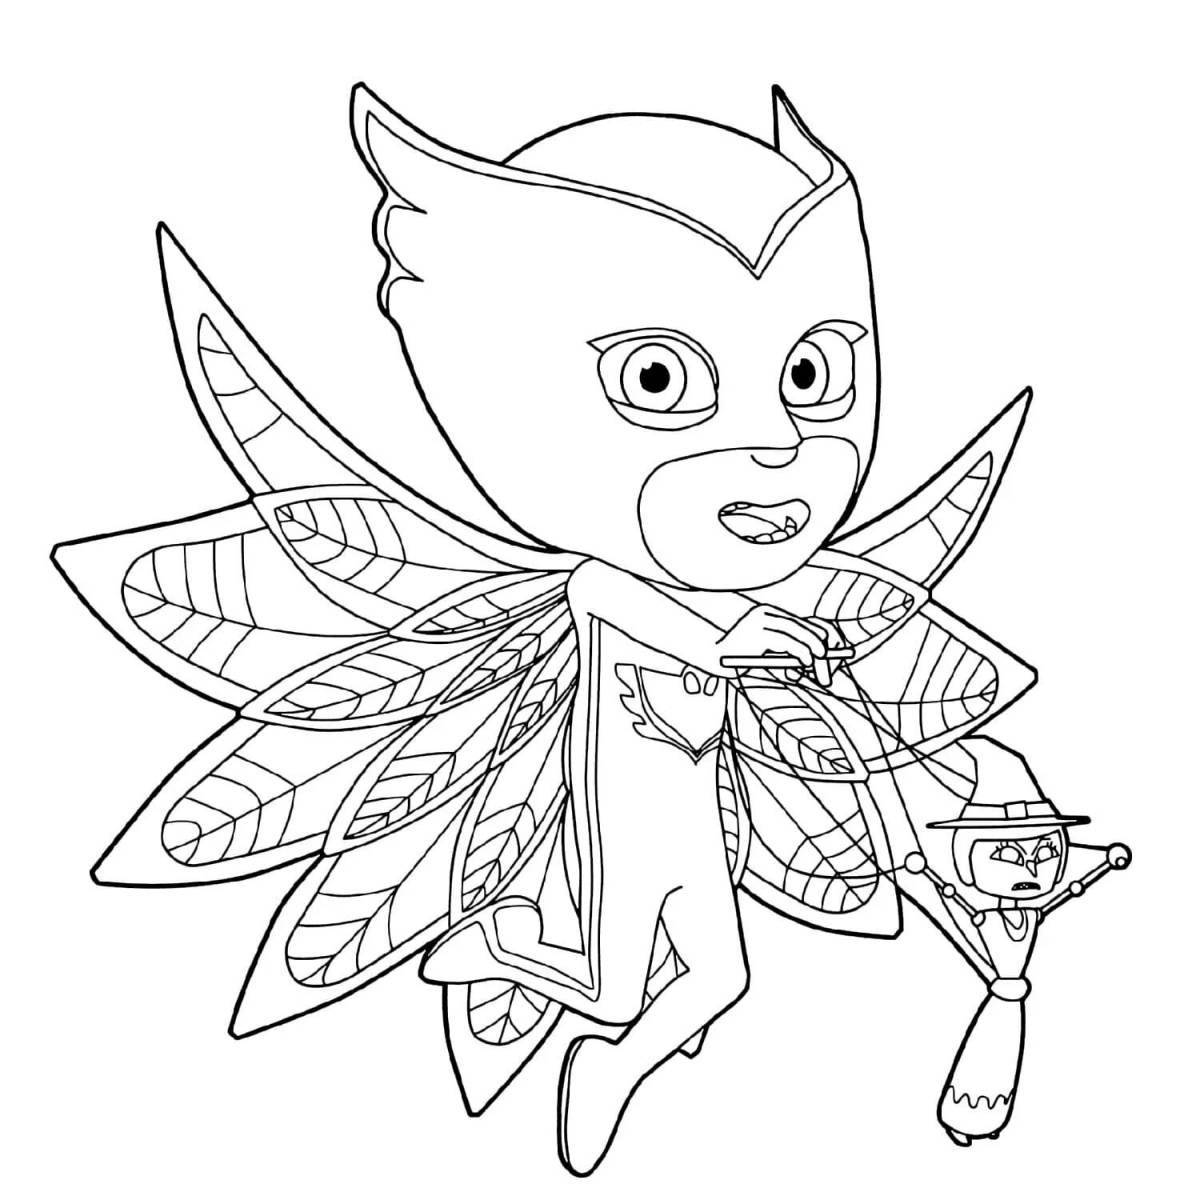 Dramatic coloring pages heroes in alet masks